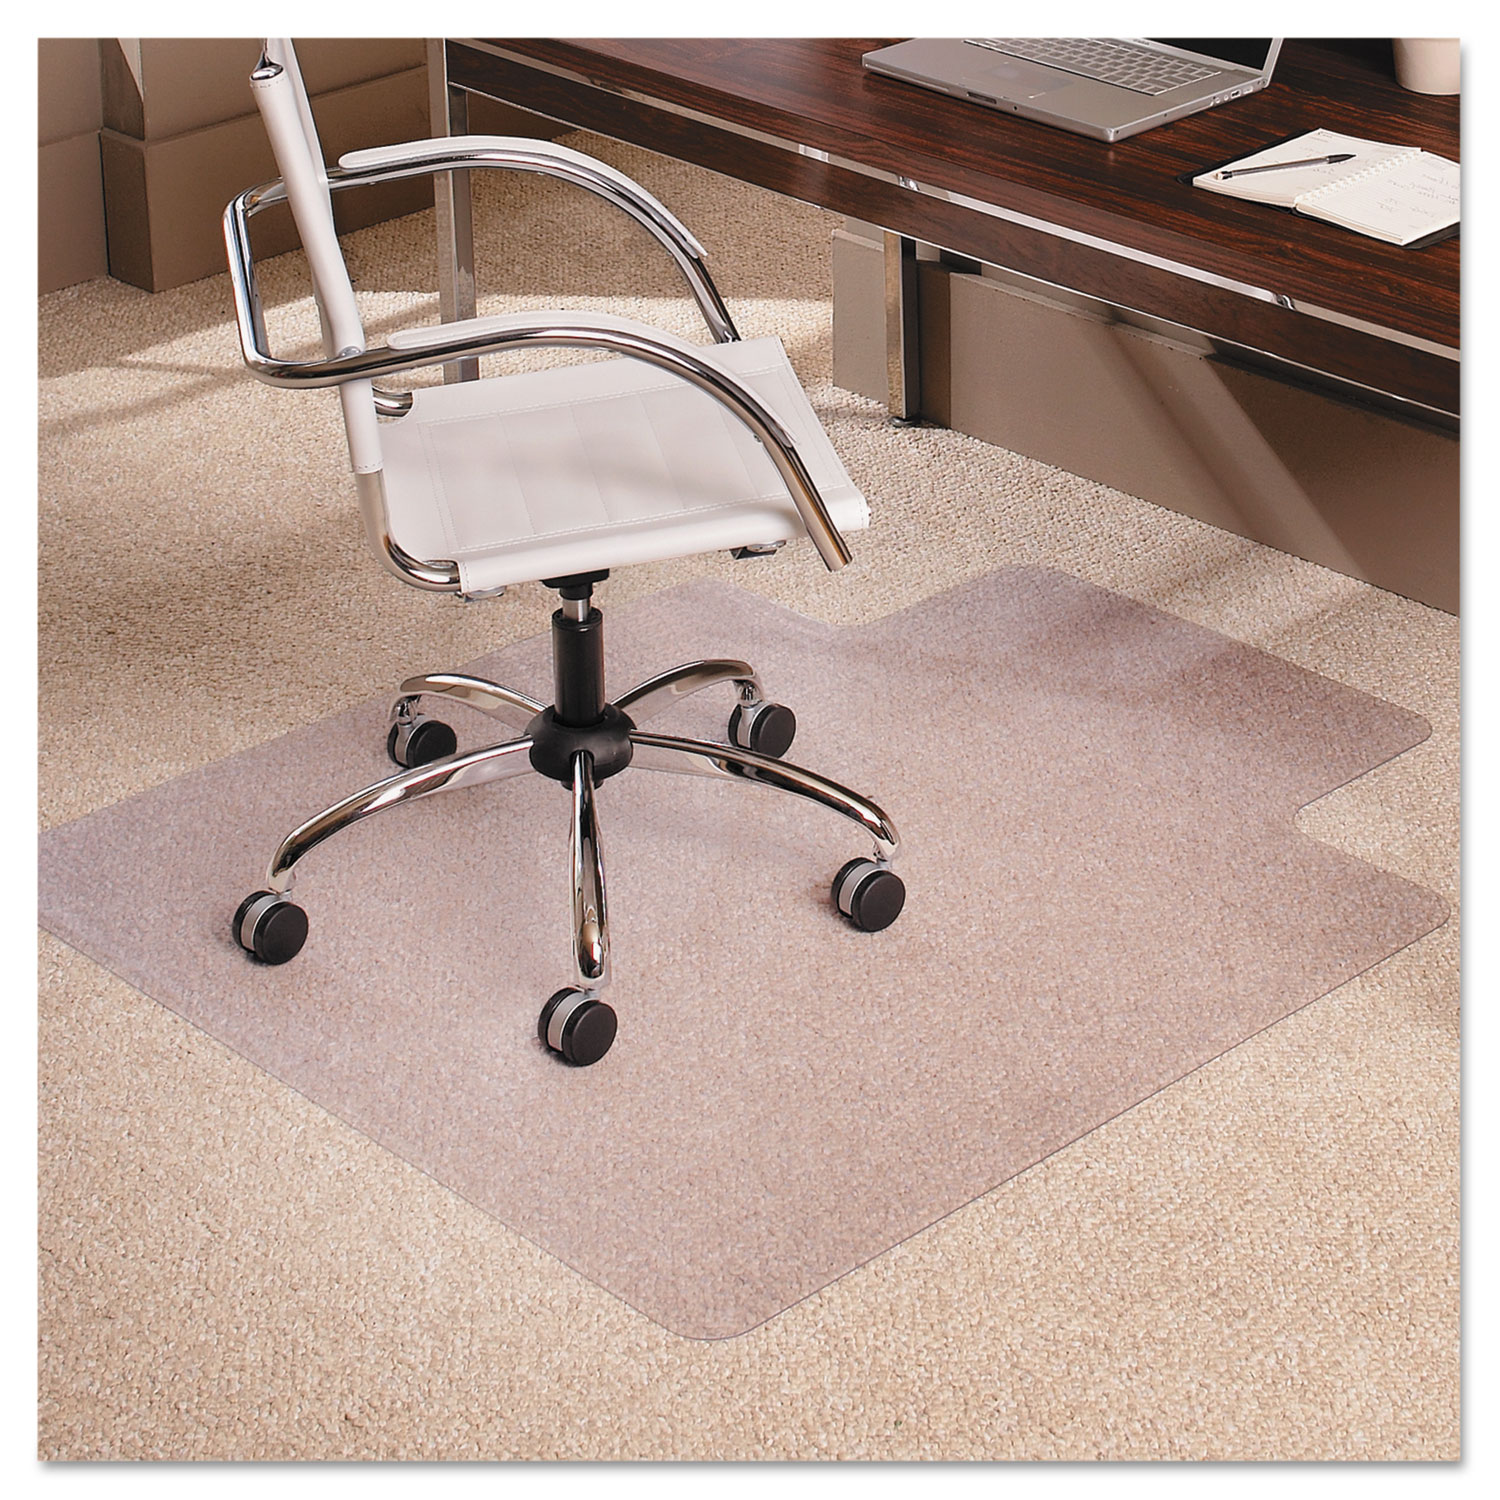 36x48 Lip Chair Mat, Multi-Task Series AnchorBar for Carpet up to 3/8